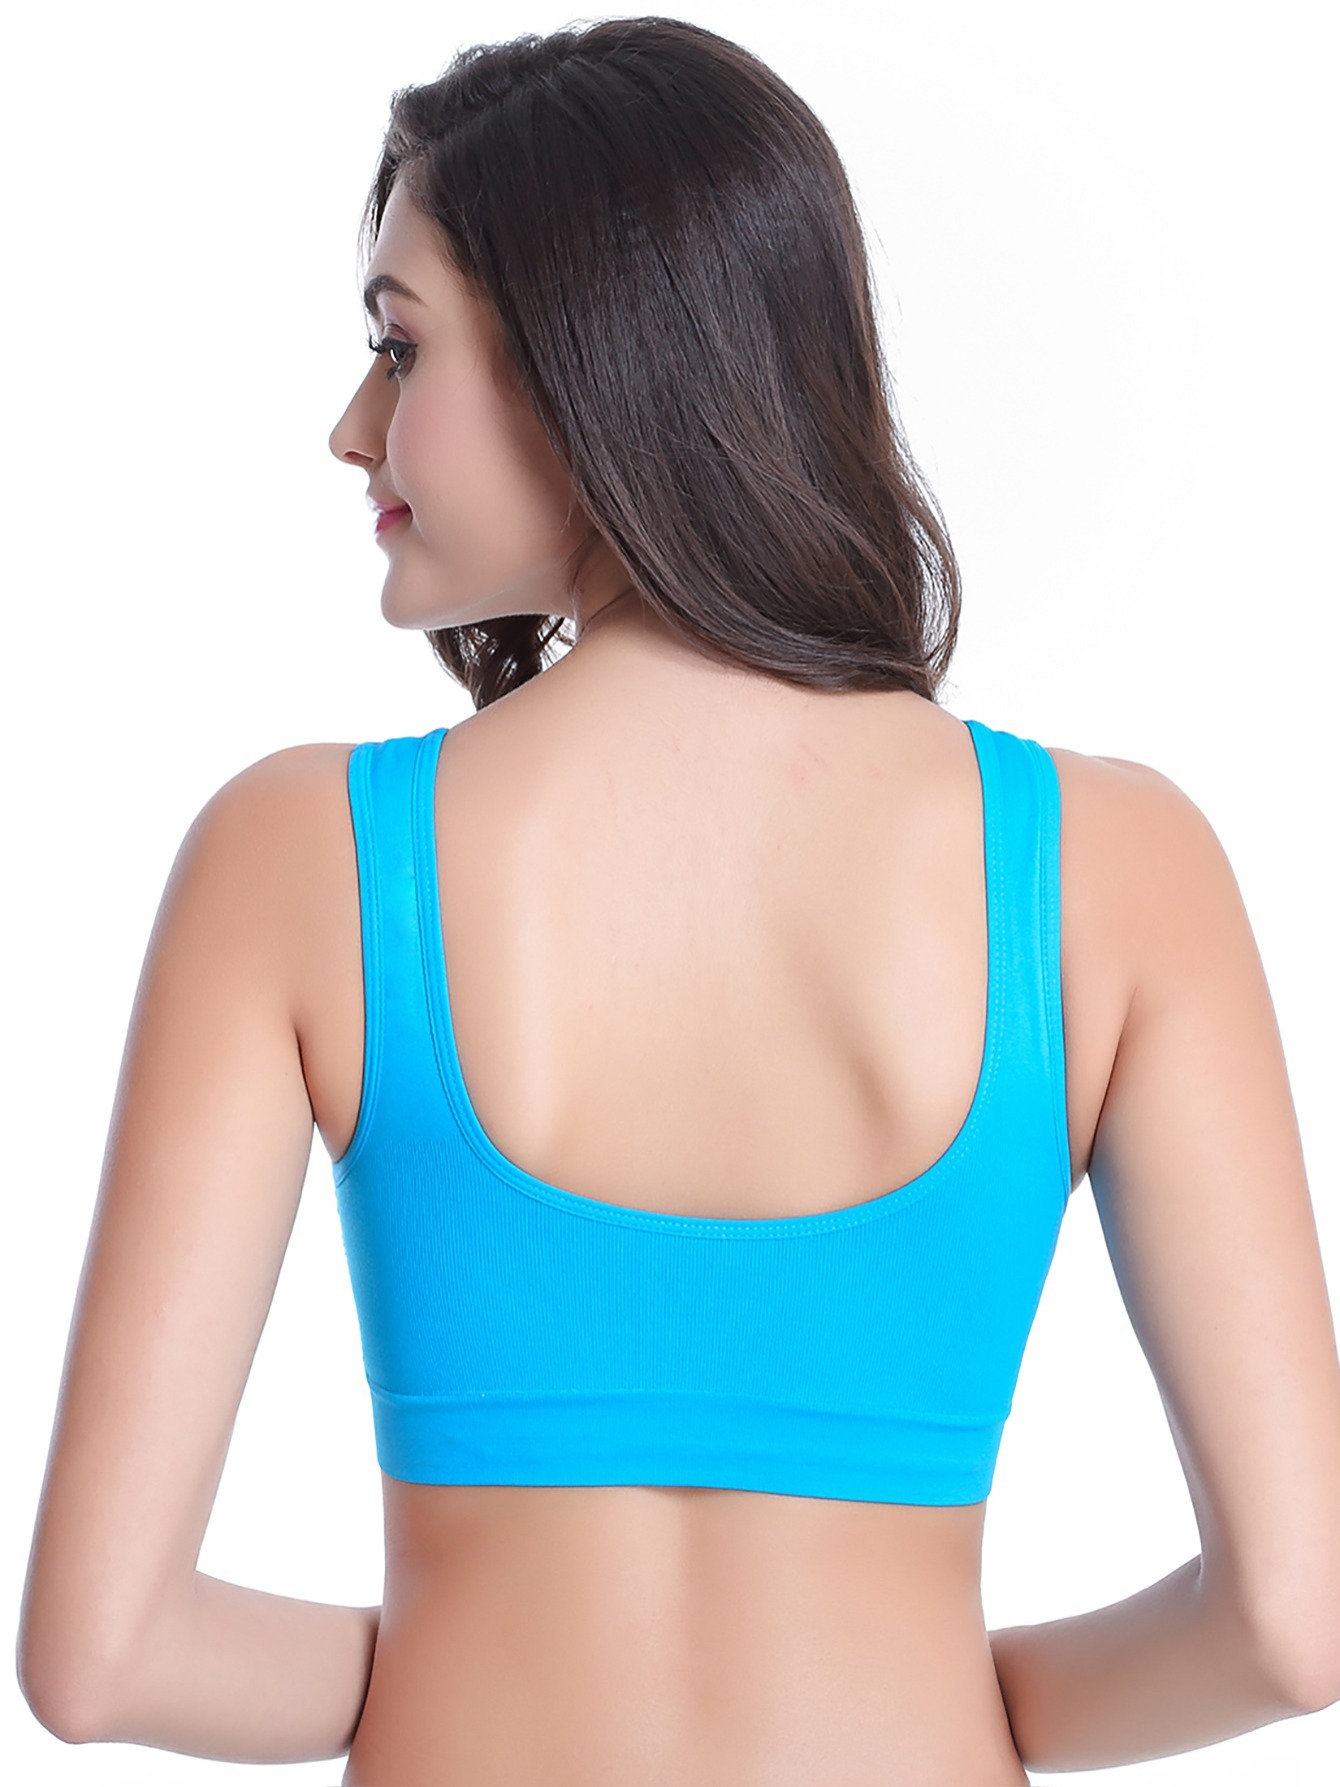 Fshway Seamless Comfort: Padded Slip-On Sports Bra for Women - Effortless  Support and Style (Free Size-Best for 30 to 36 Boob Size)